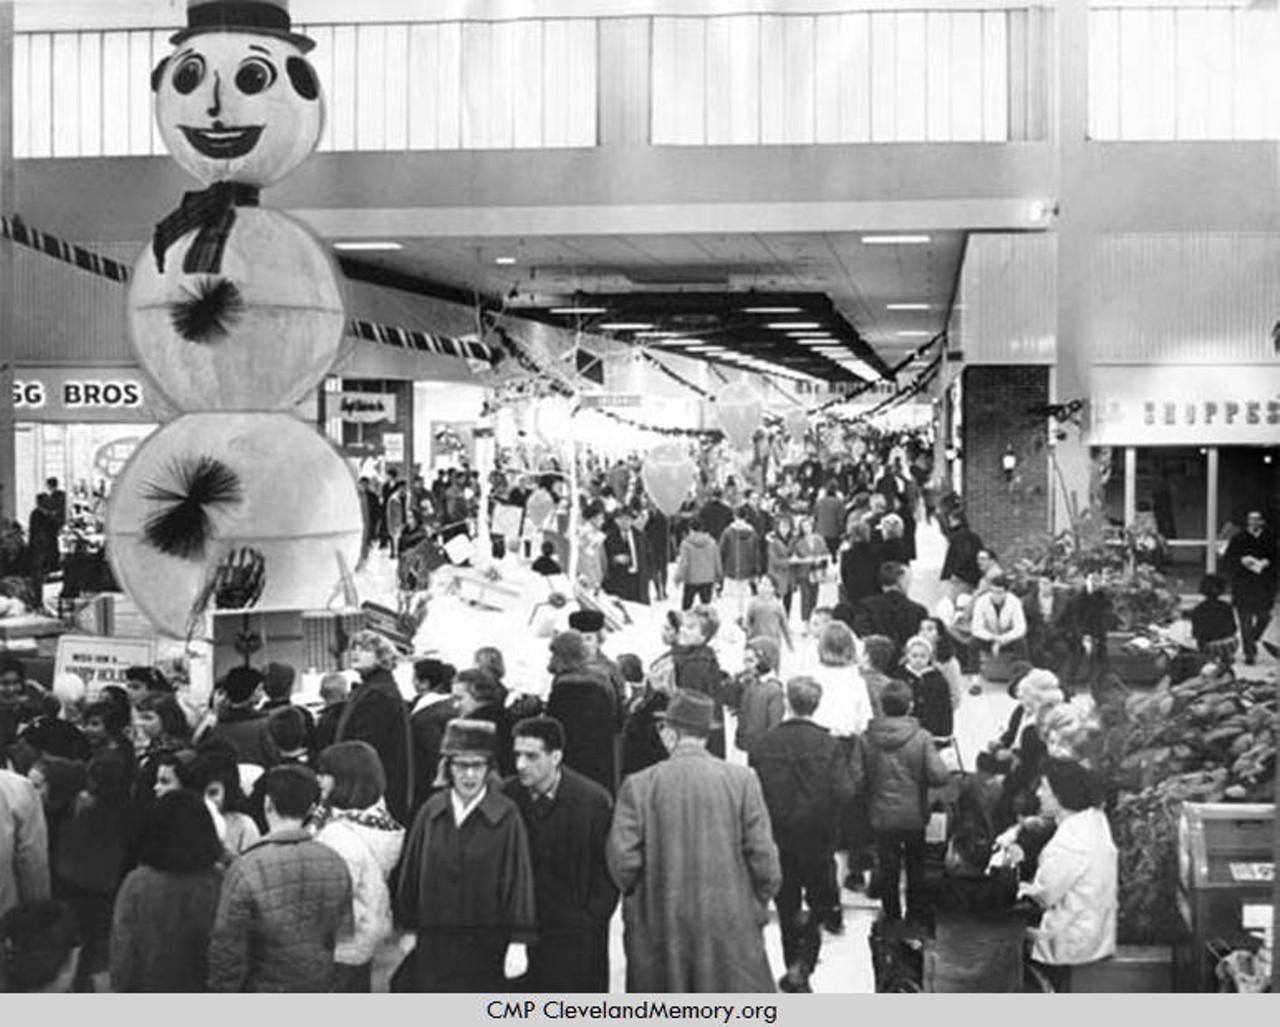 Crowds celebrate the holidays at festively decorated Severance Shopping center in Cleveland Heights, Ohio. 1964